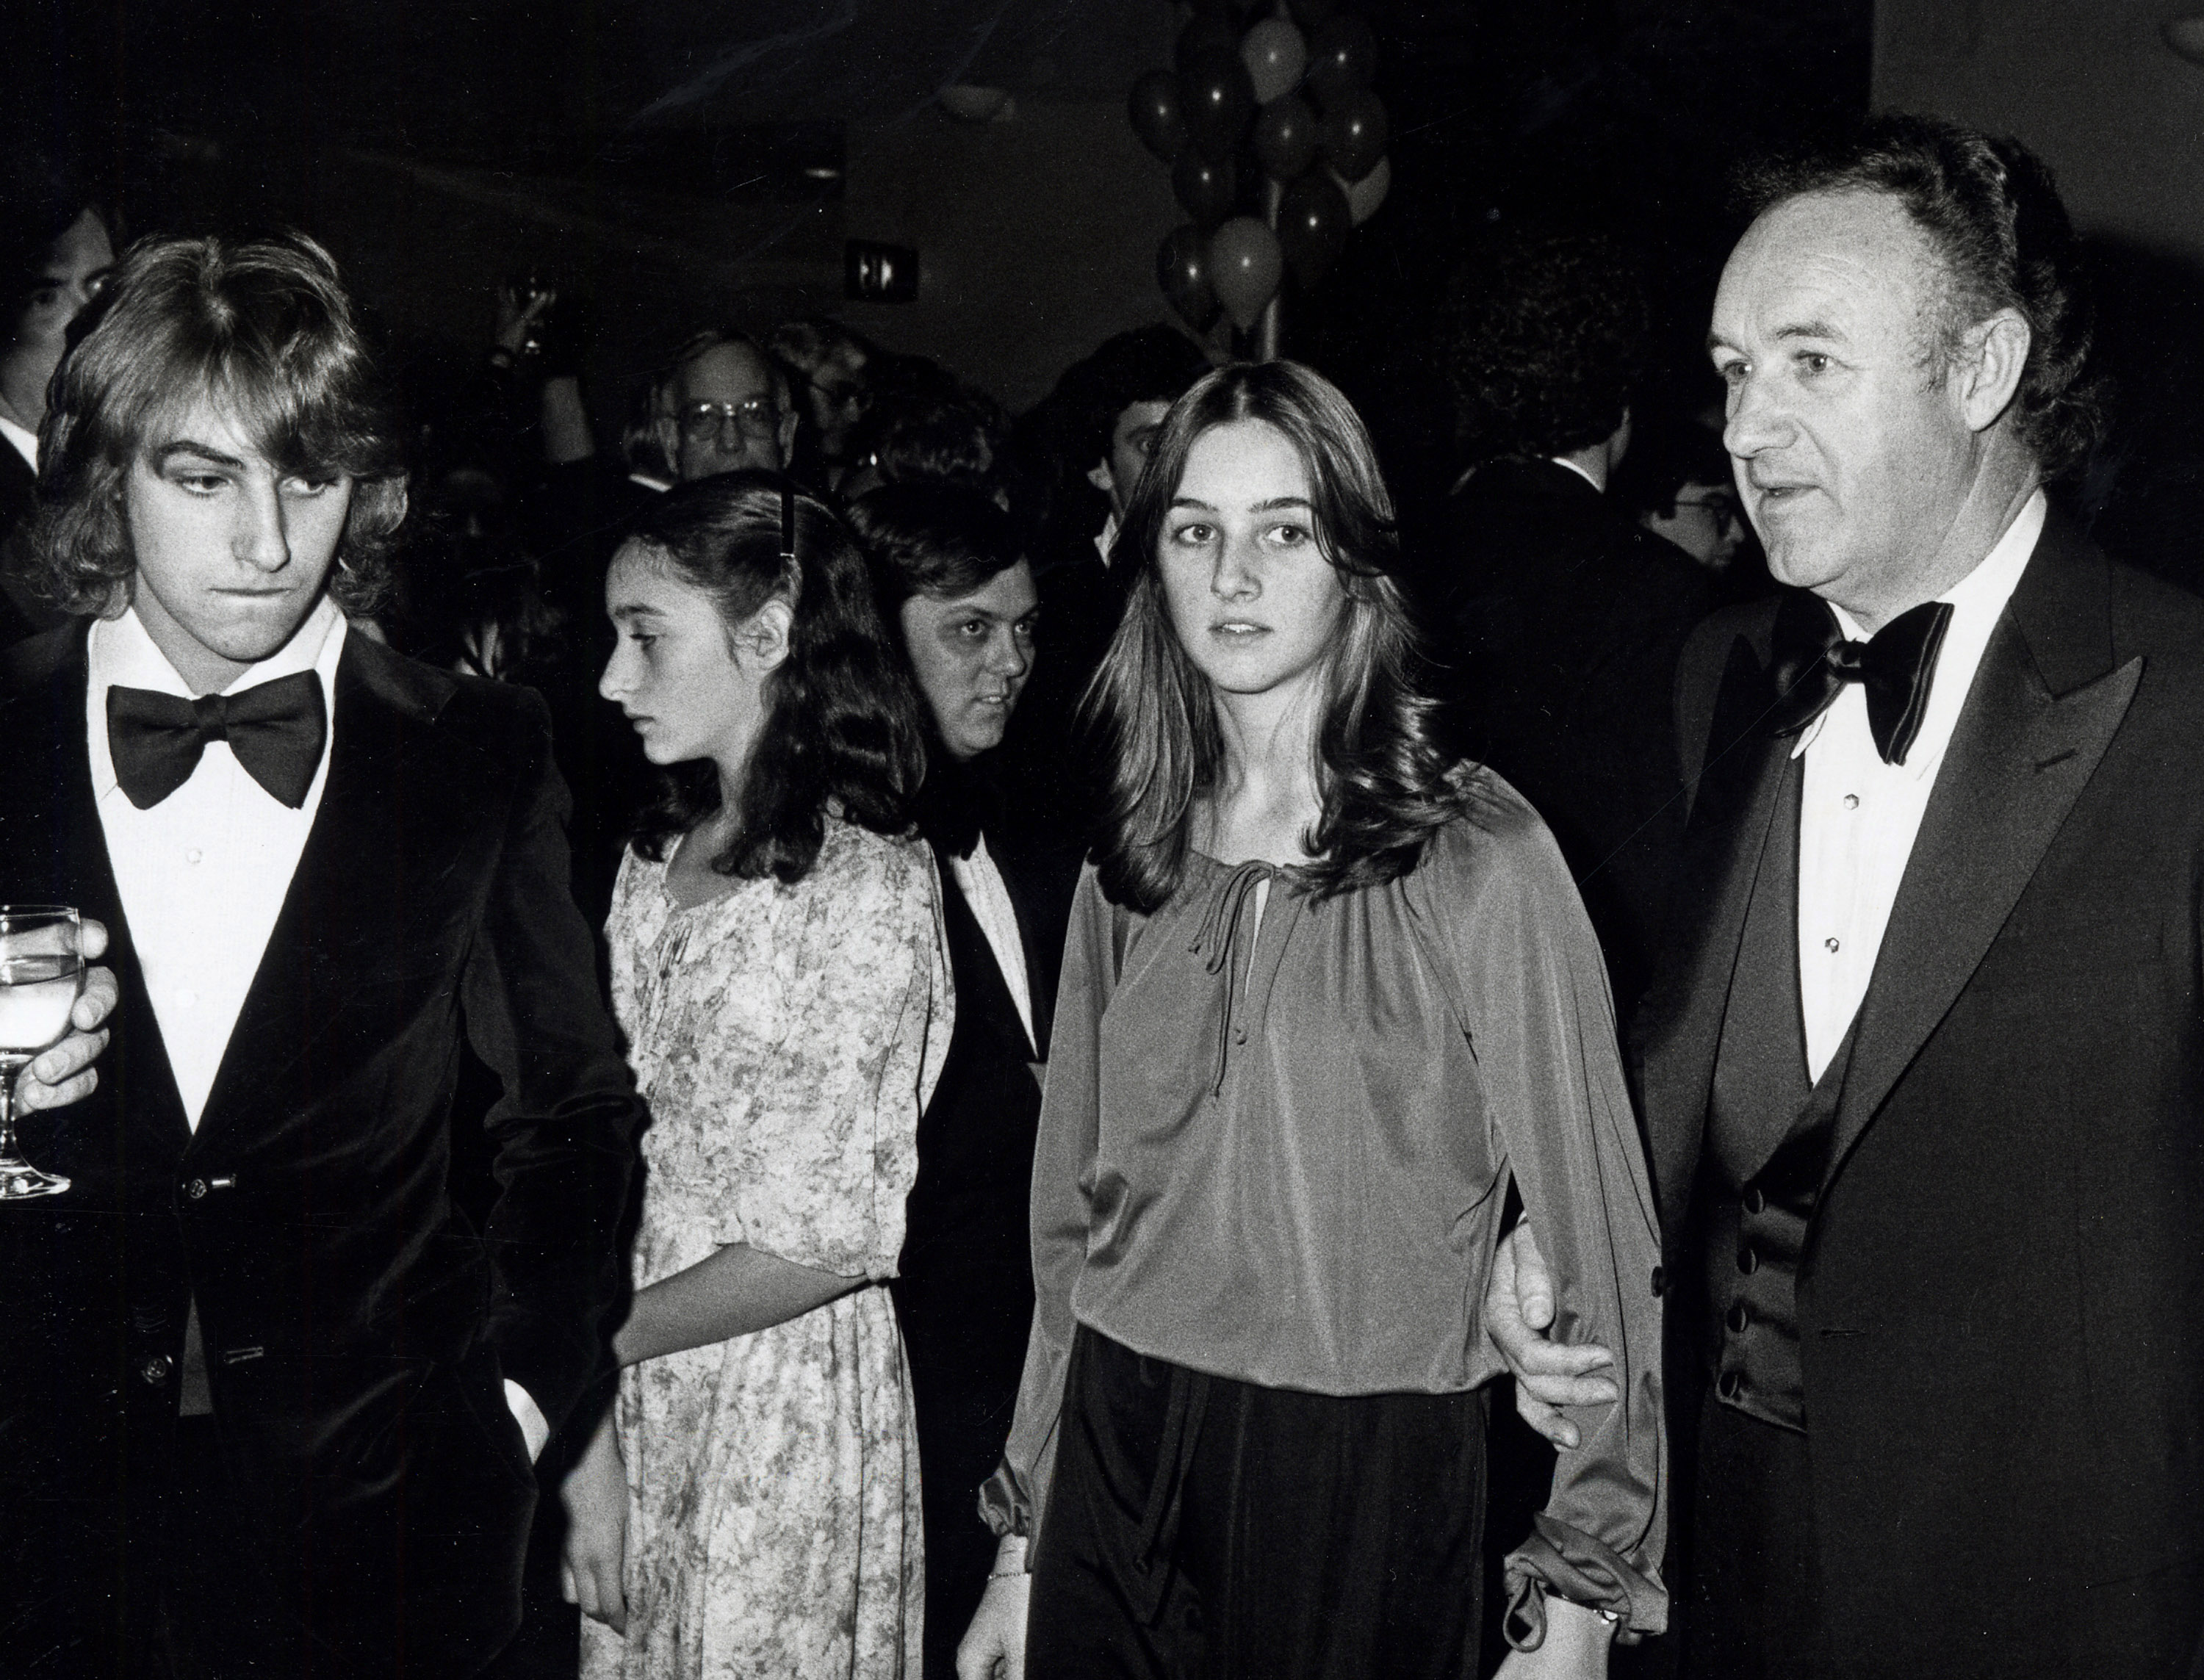 Gene Hackman (R), his son Christopher (L), and his daughter Elizabeth (middle) attend the presidential premiere of Superman in Washington, D.C. on December 10, 1978